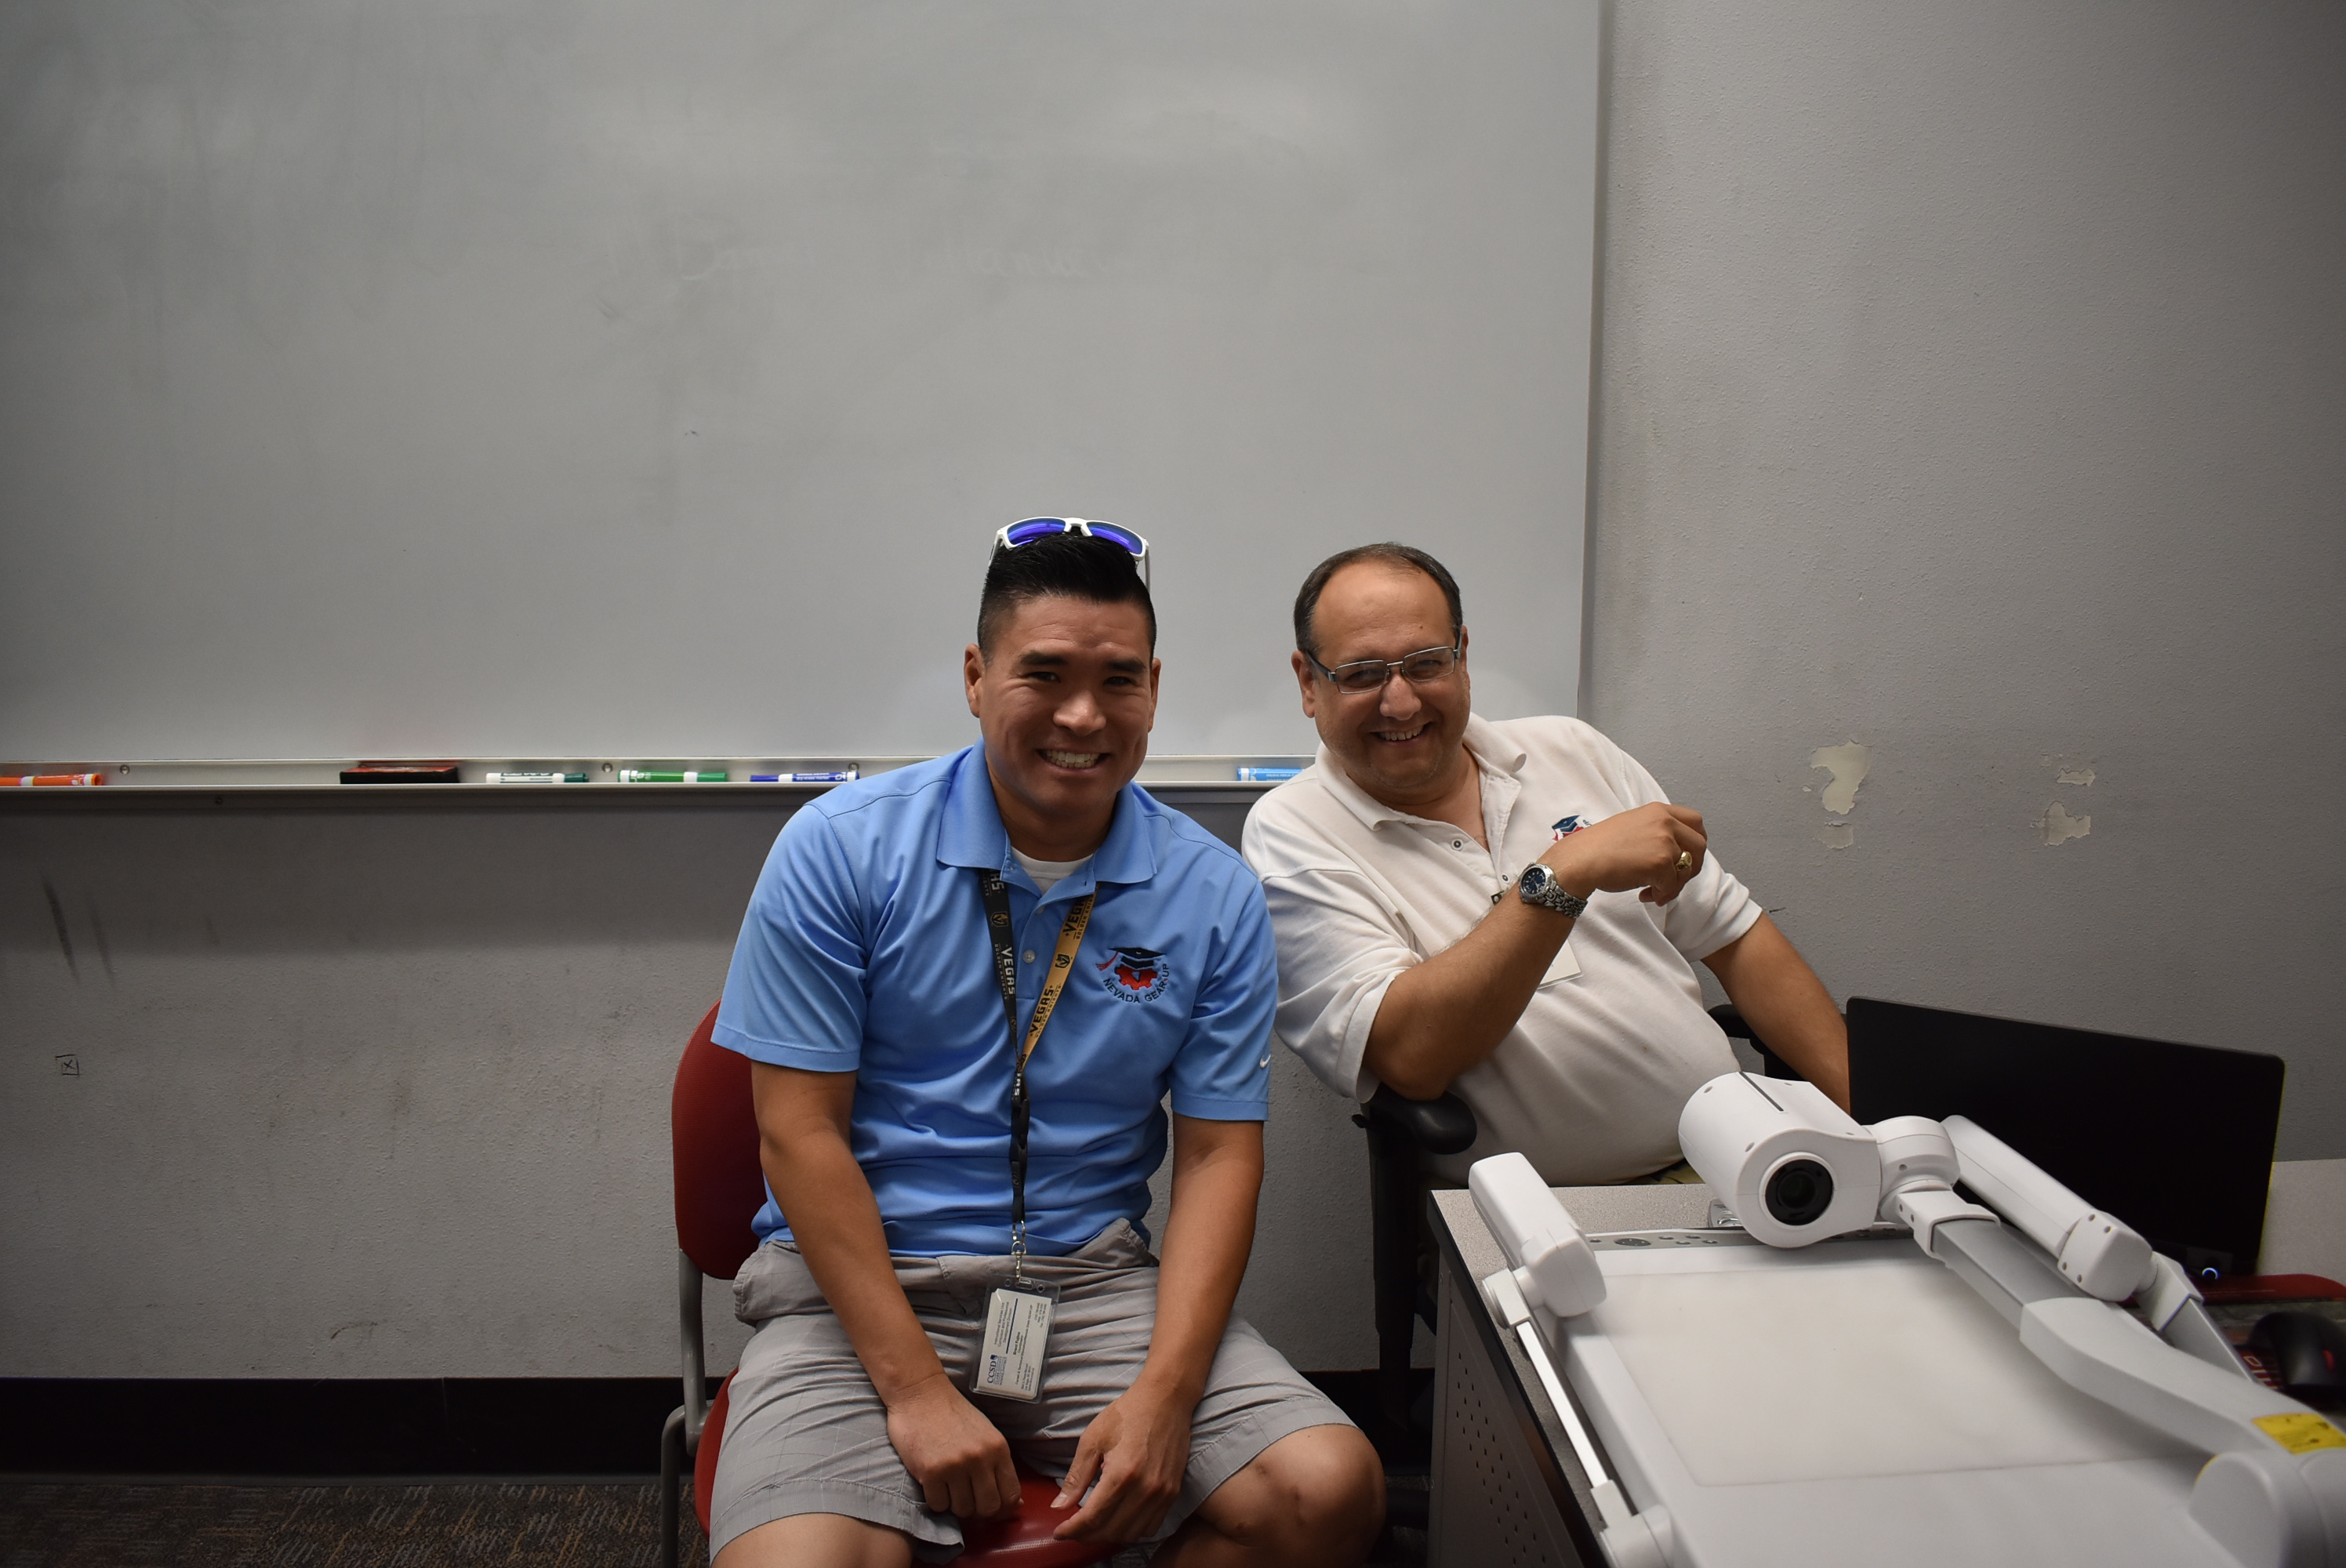 A pair of men sit near a classroom projector and smile for the camera